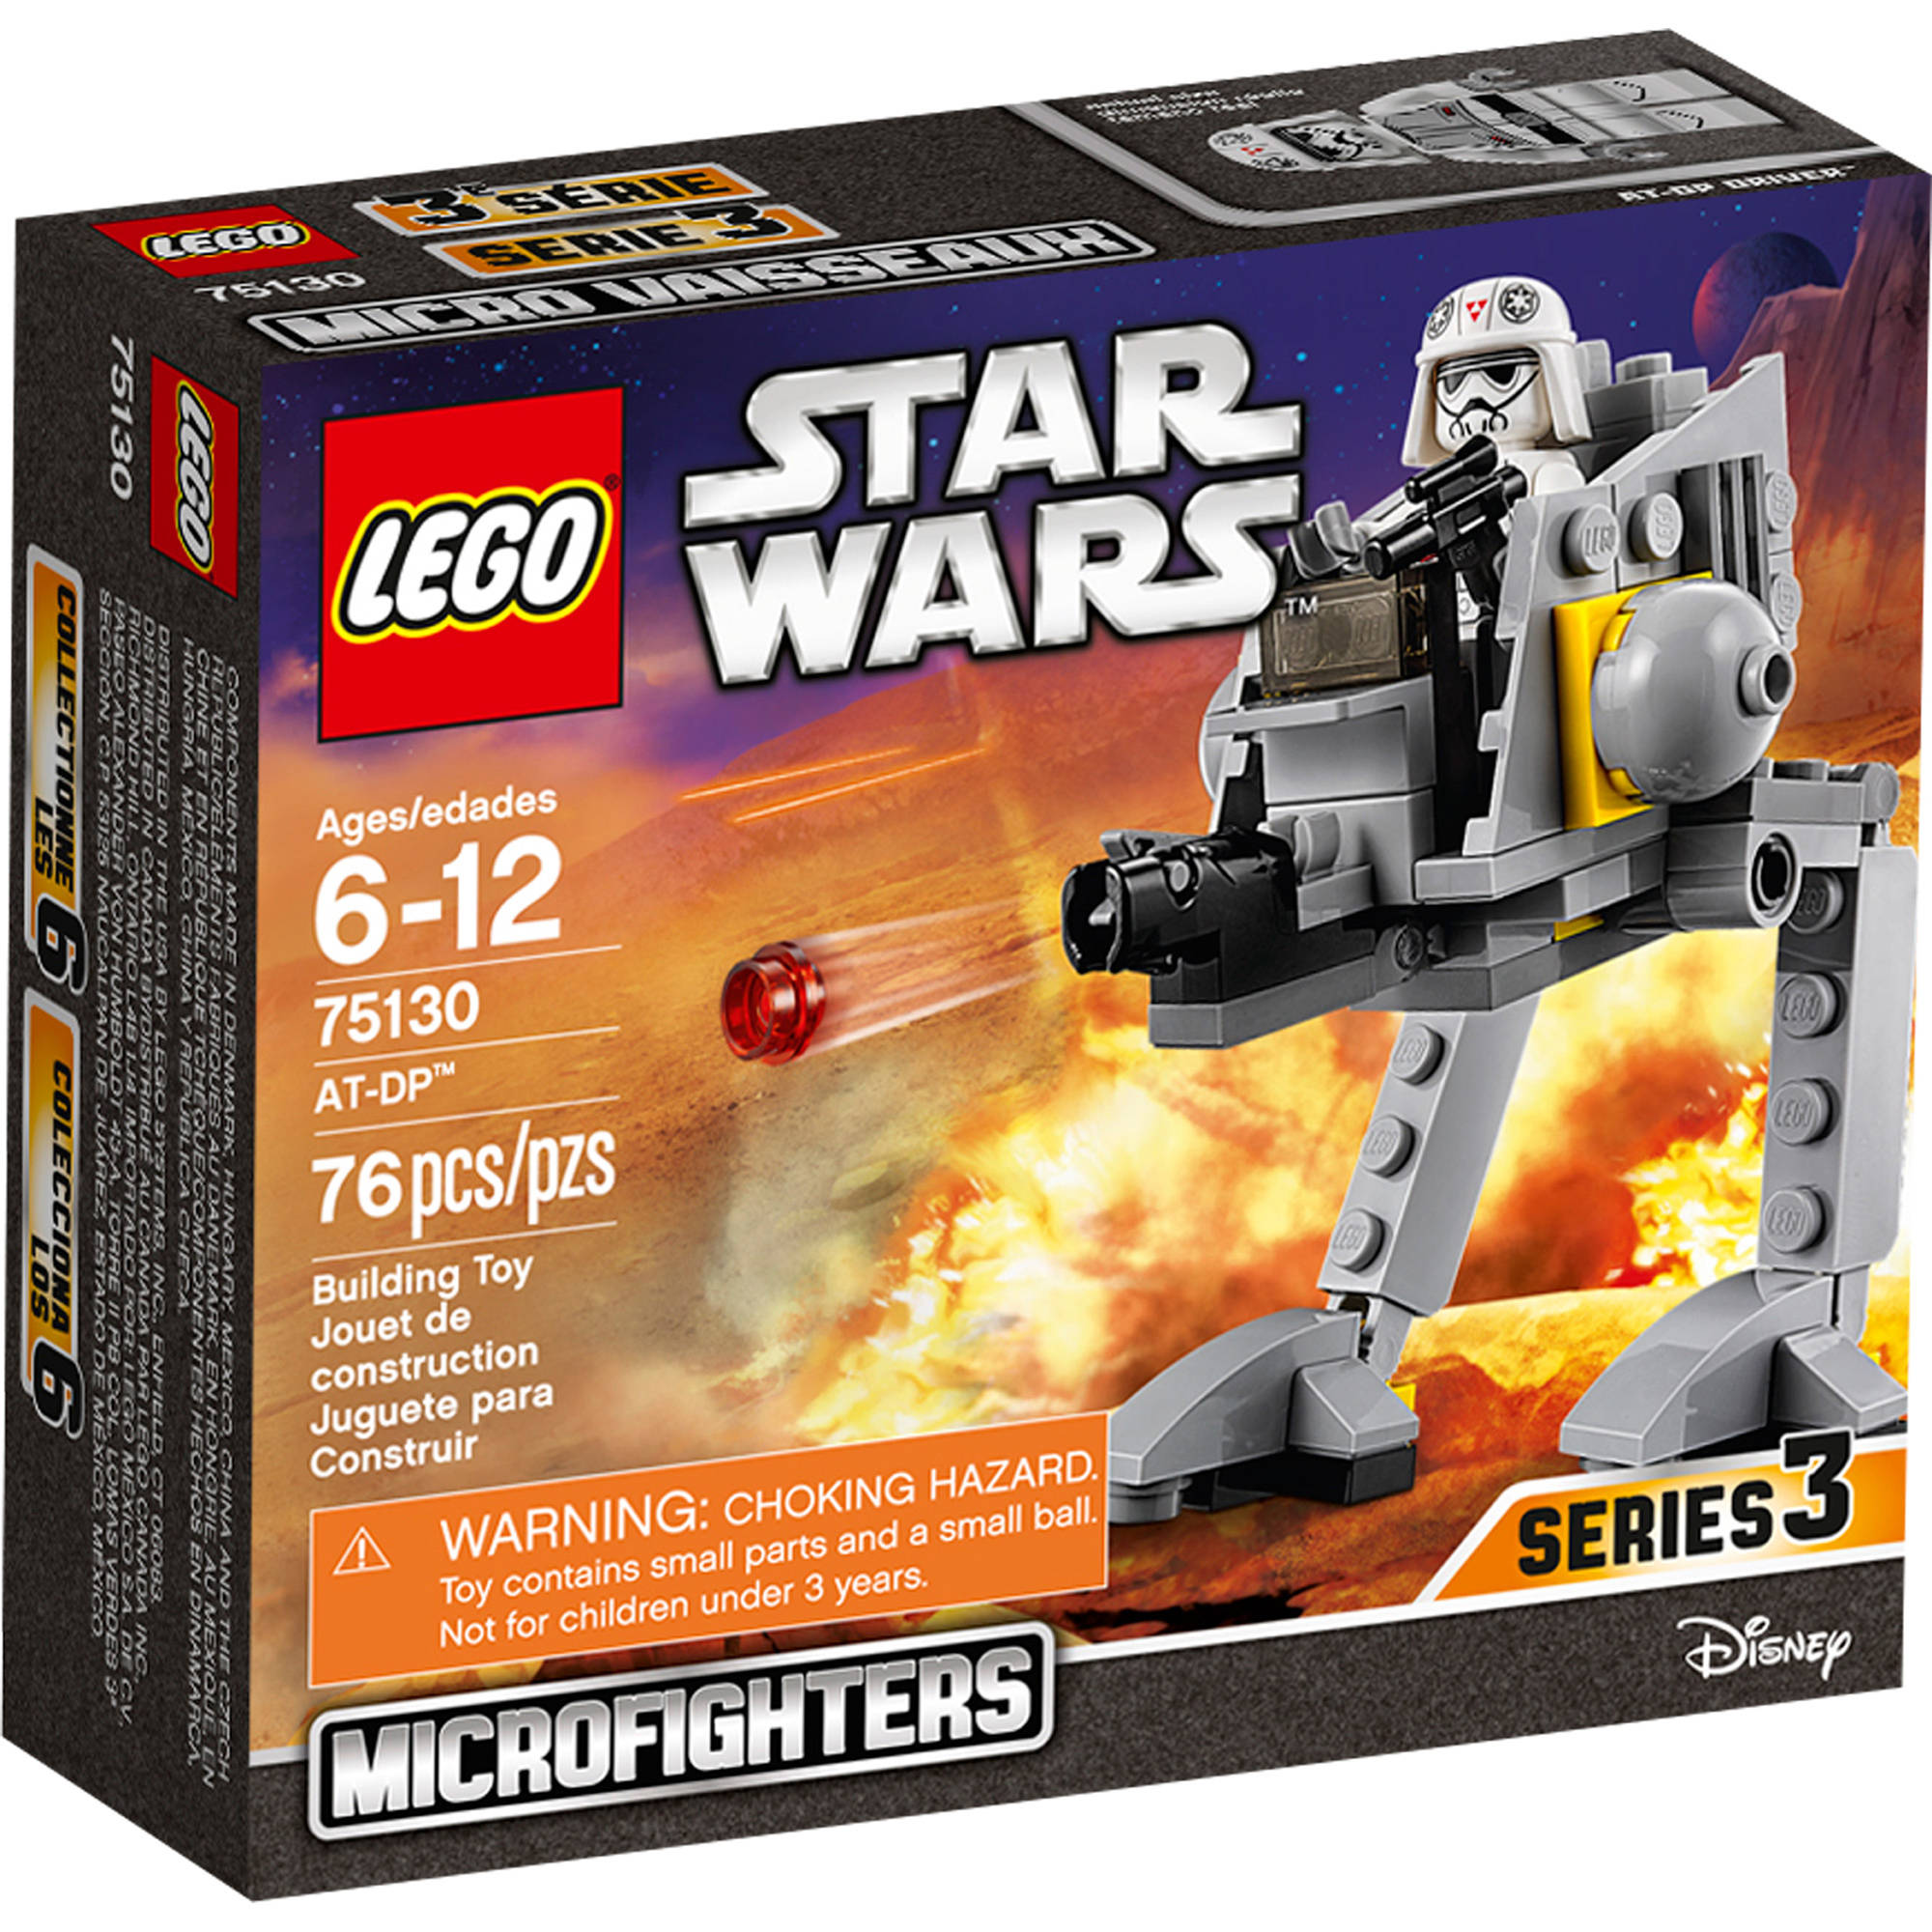 SWR Rebels AT-DP Microfighters Lego Set 1